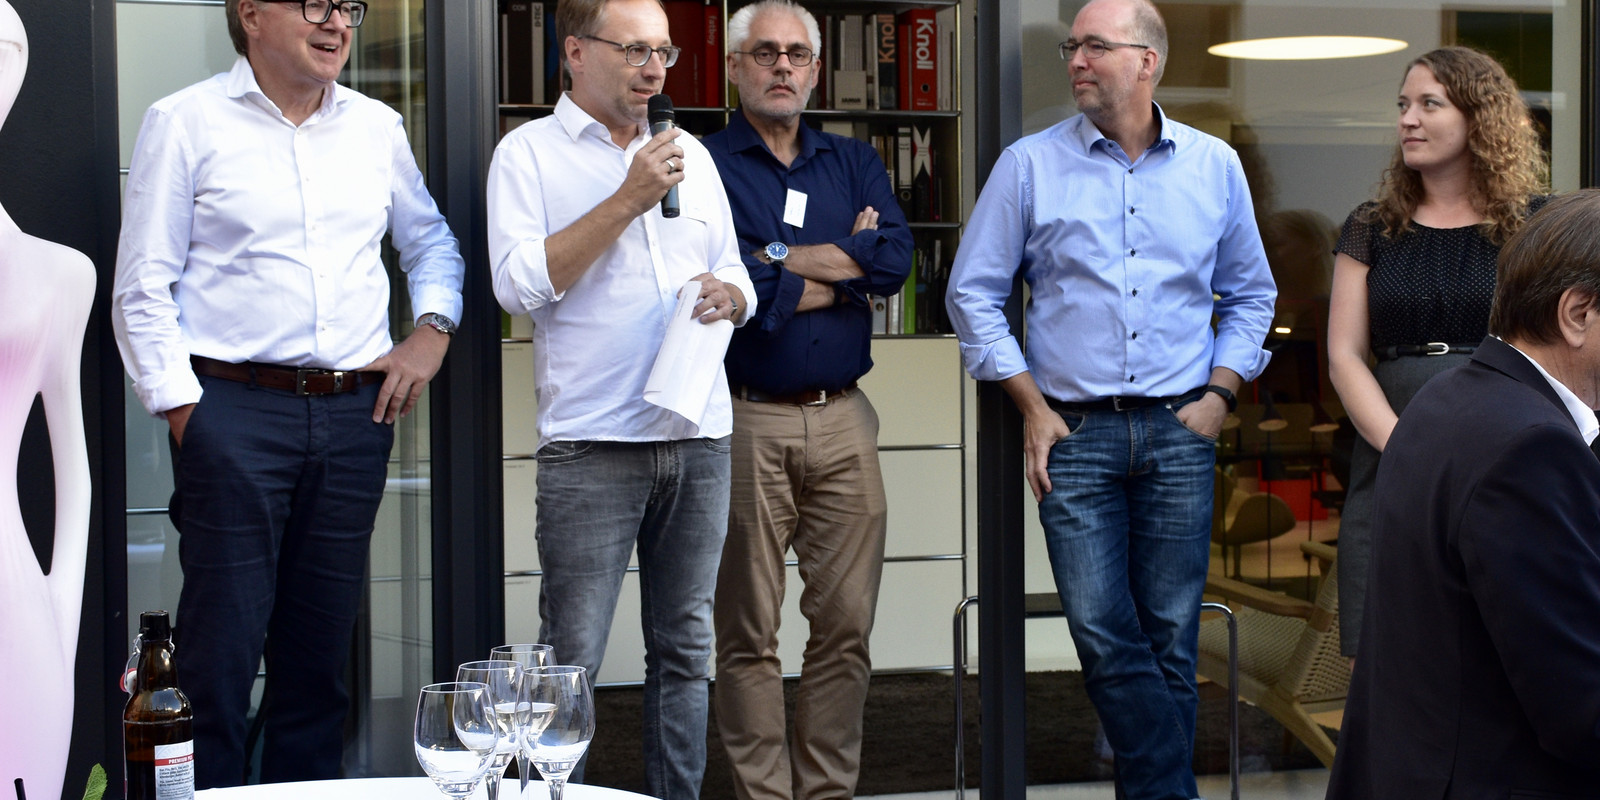 190627_Reopening_Party_Hannover Bild 1